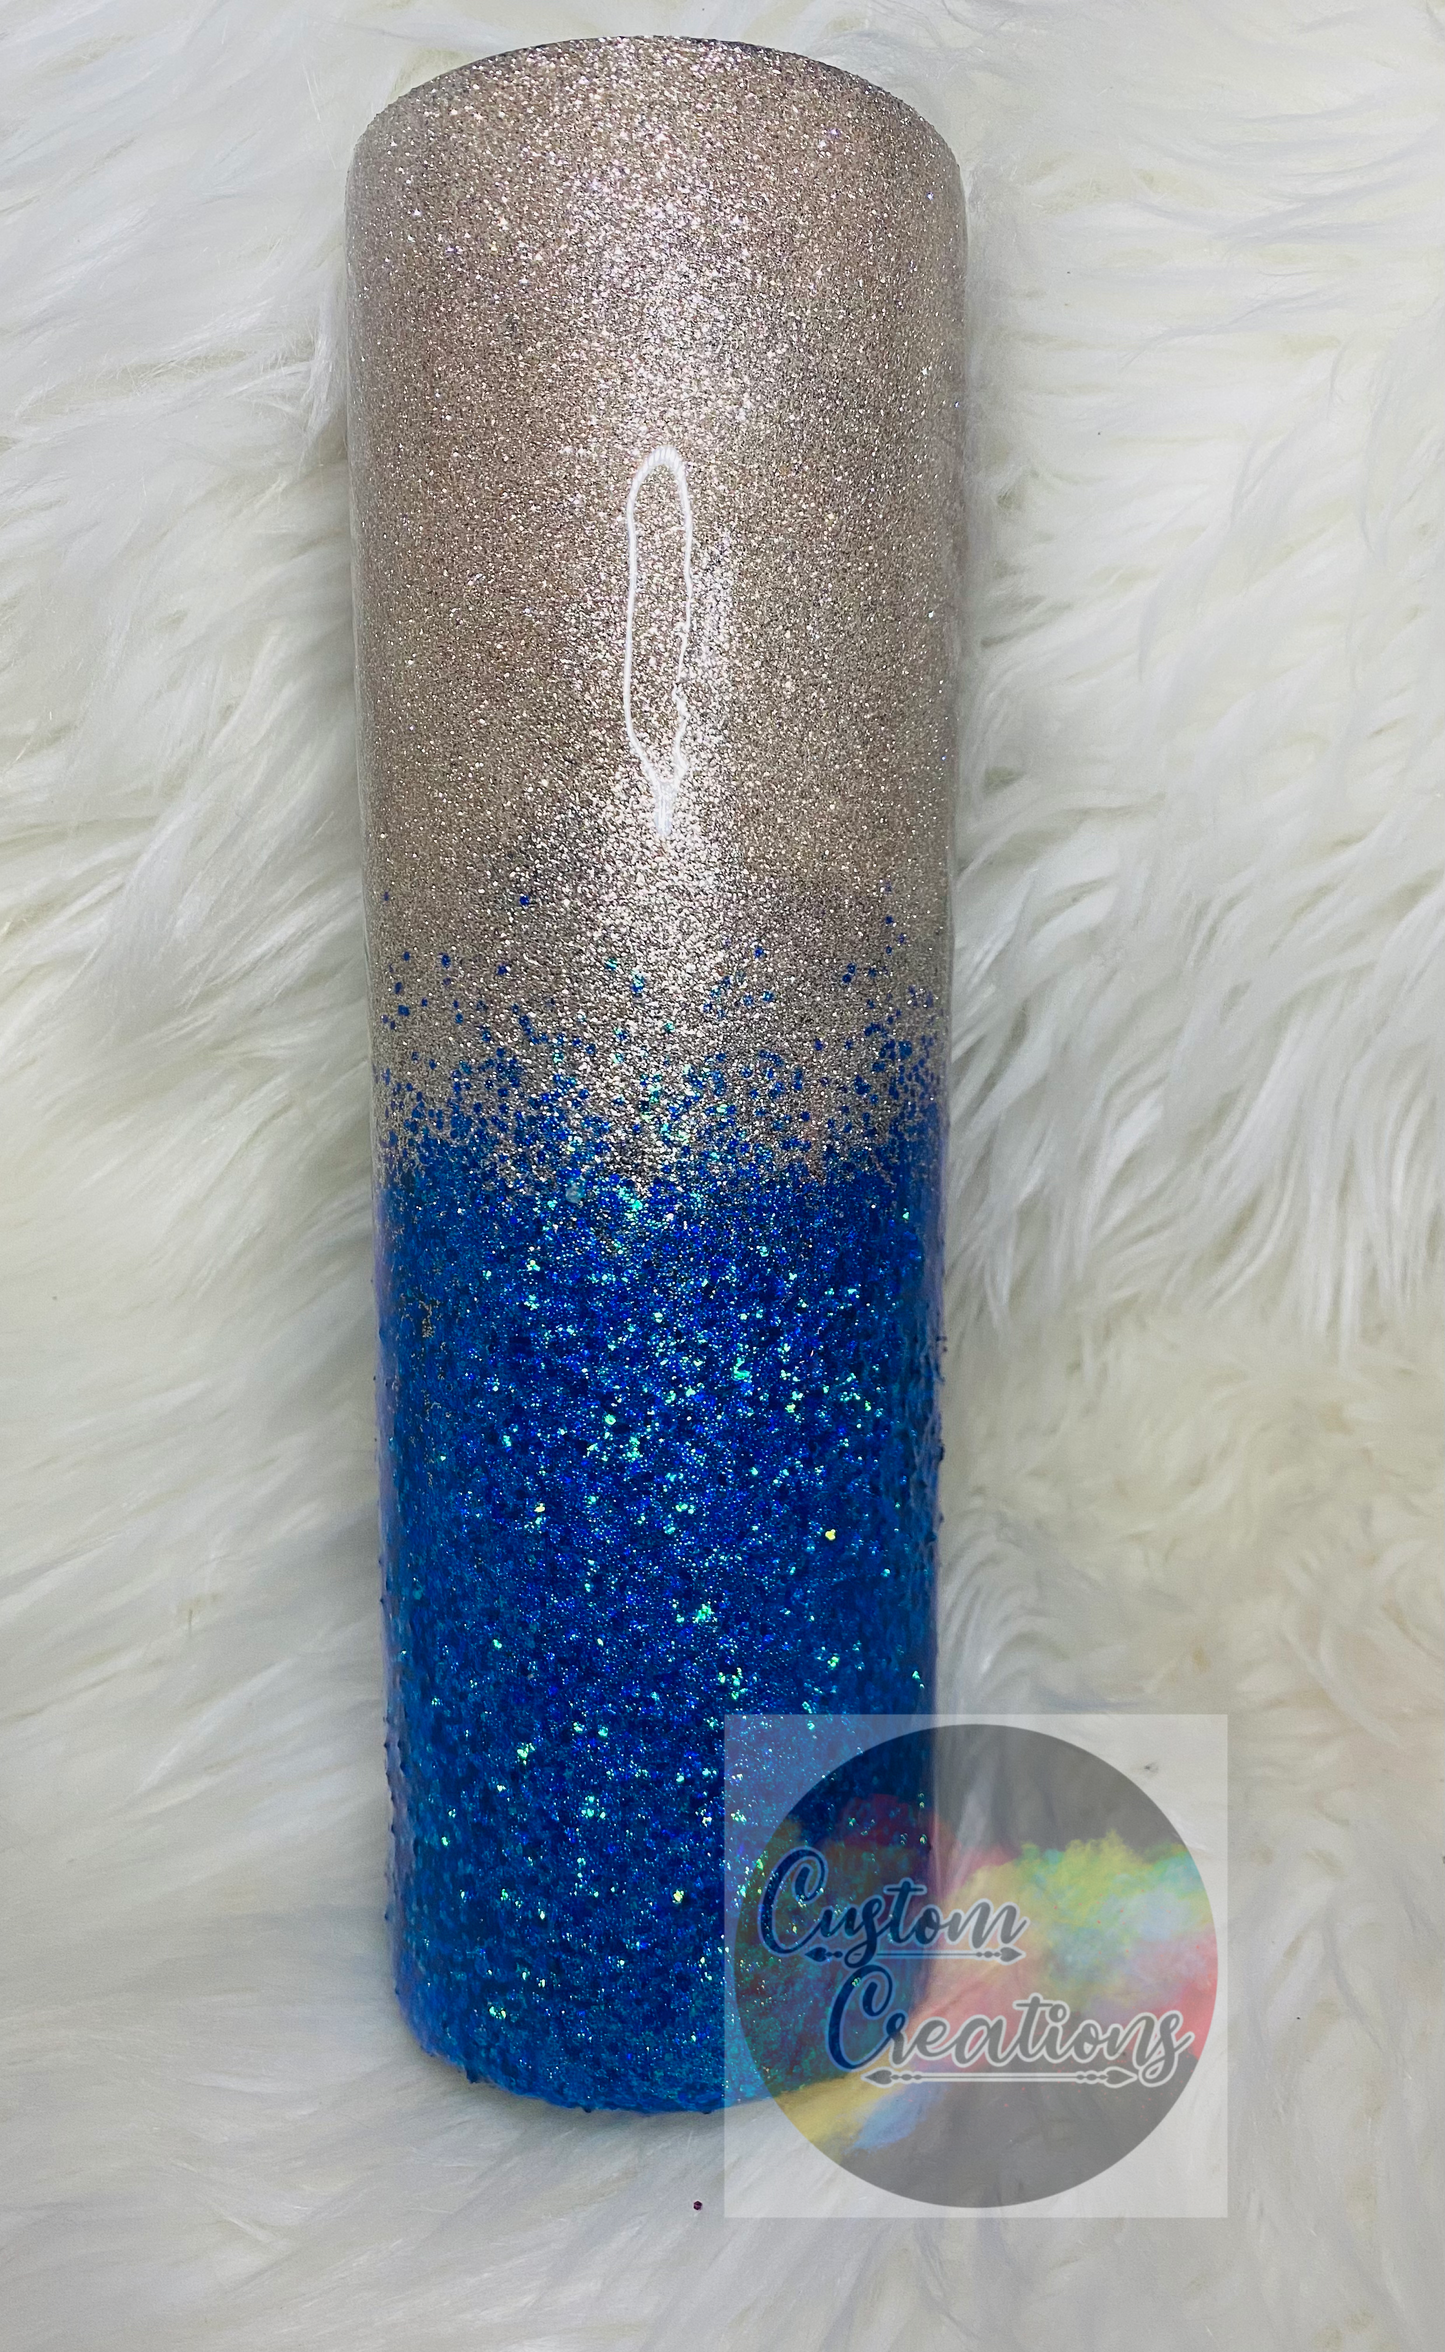 30 Ounce Skinny Tumbler Gold to Blue Ombre Epoxied with Added Glitter Customizable